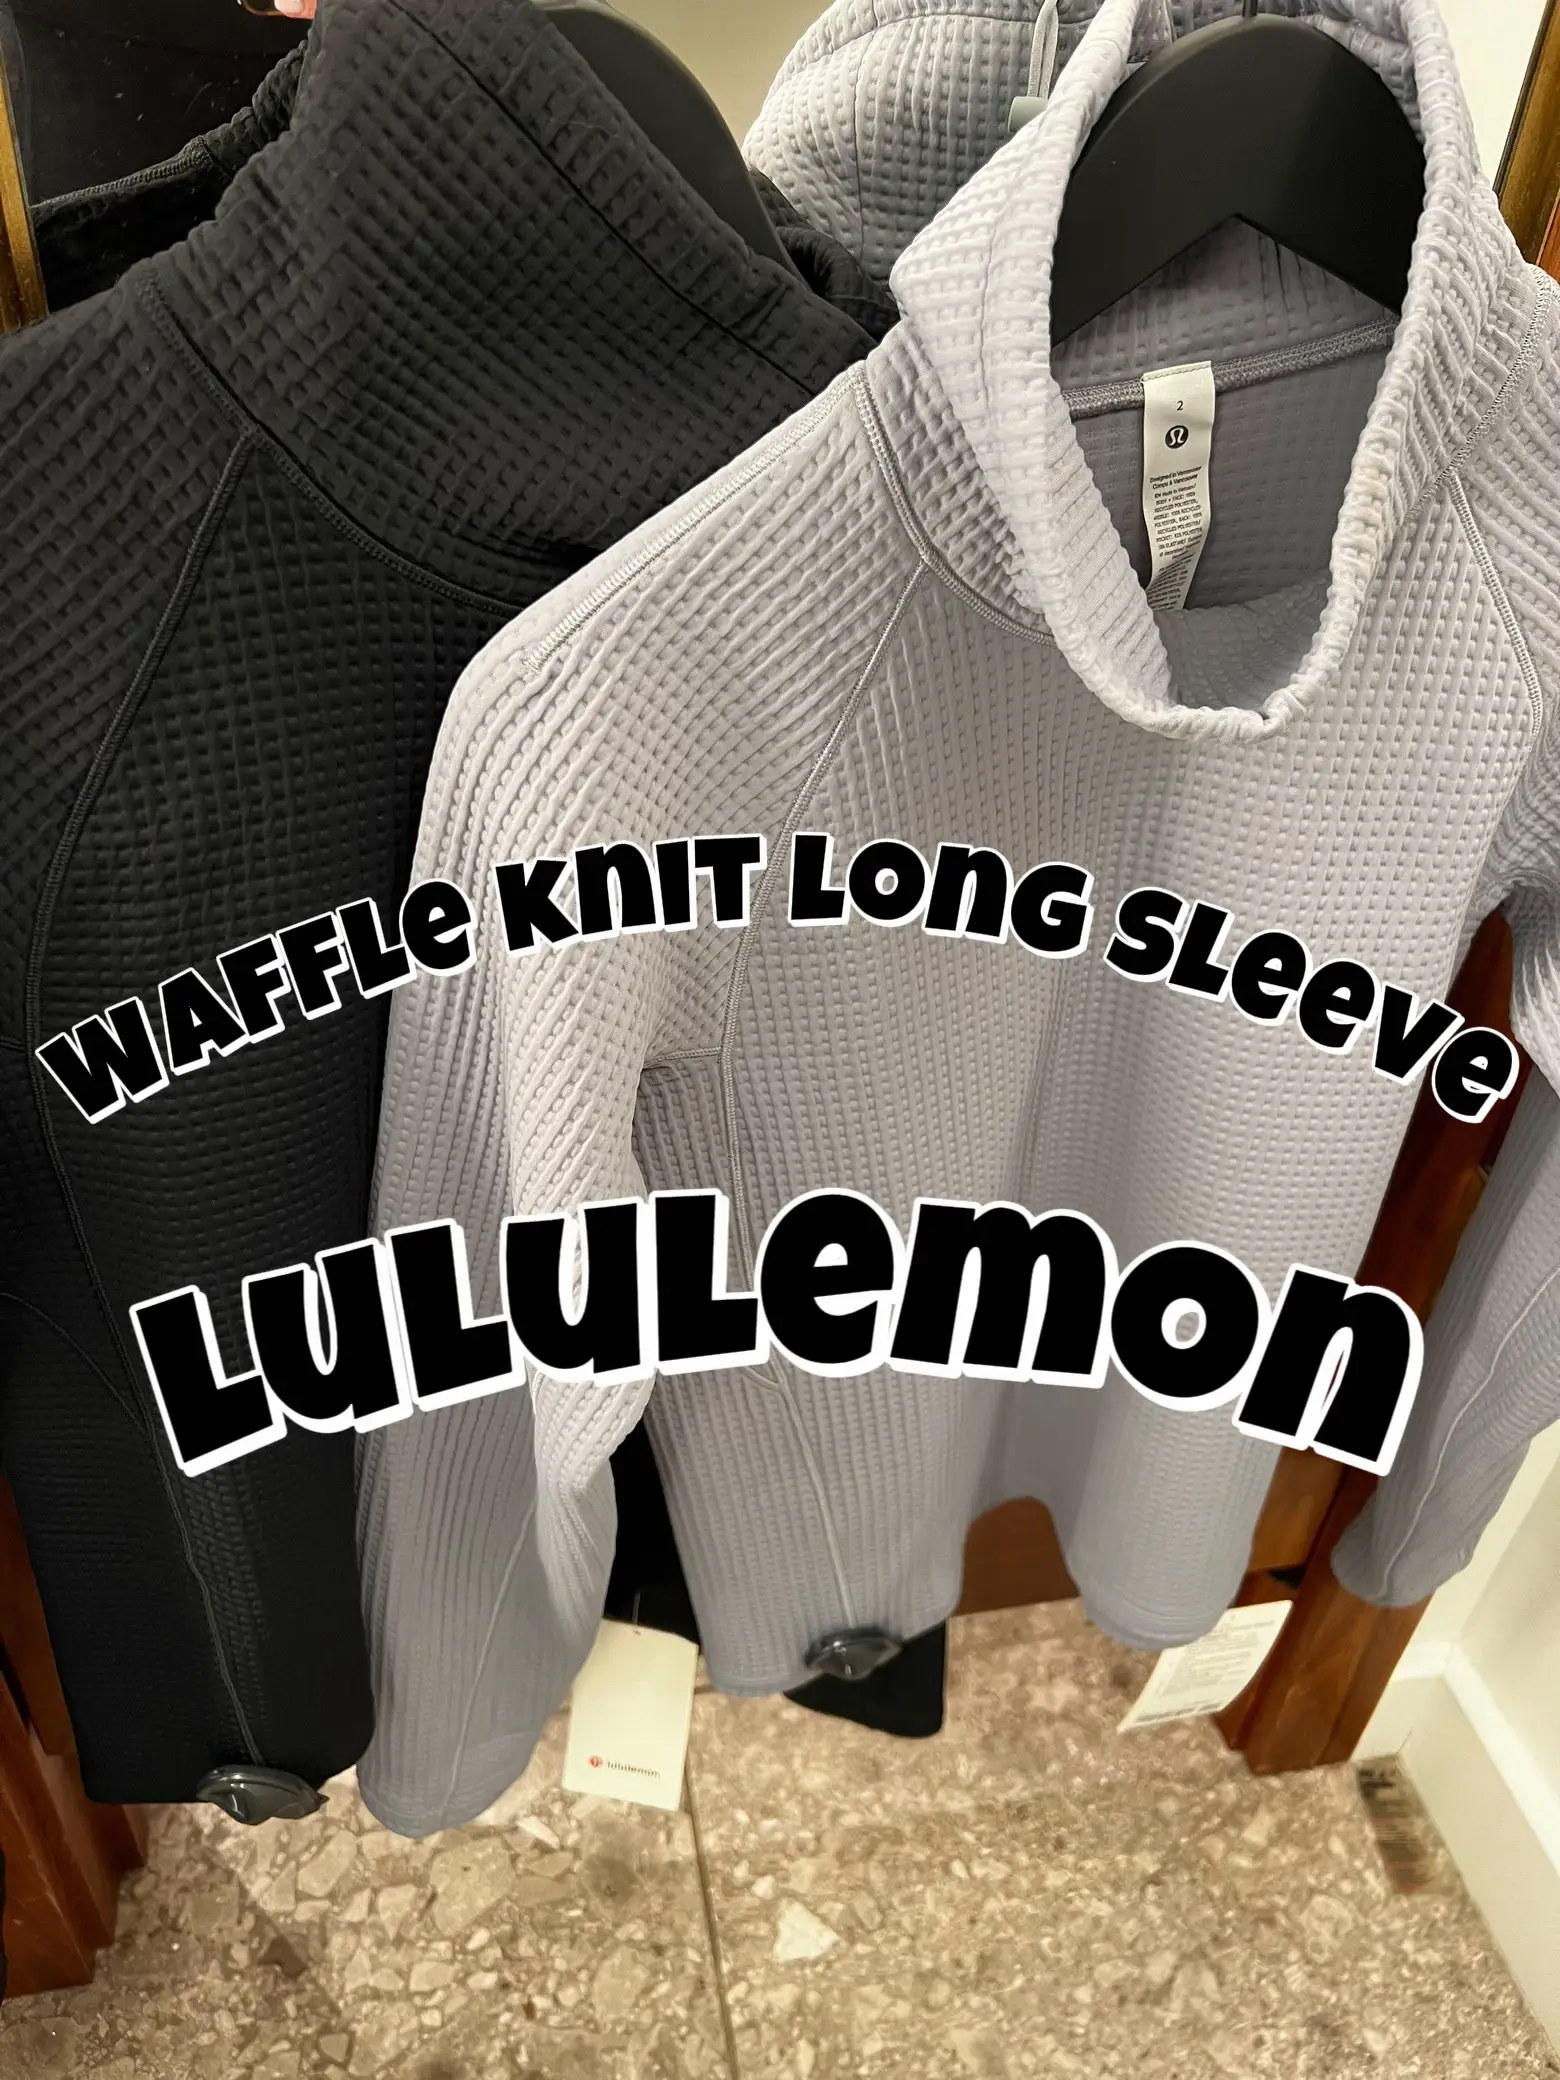 Lululemon Waffle Knit Hoodie - XL $50 (oversized) - this is available for  purchase on our website only!